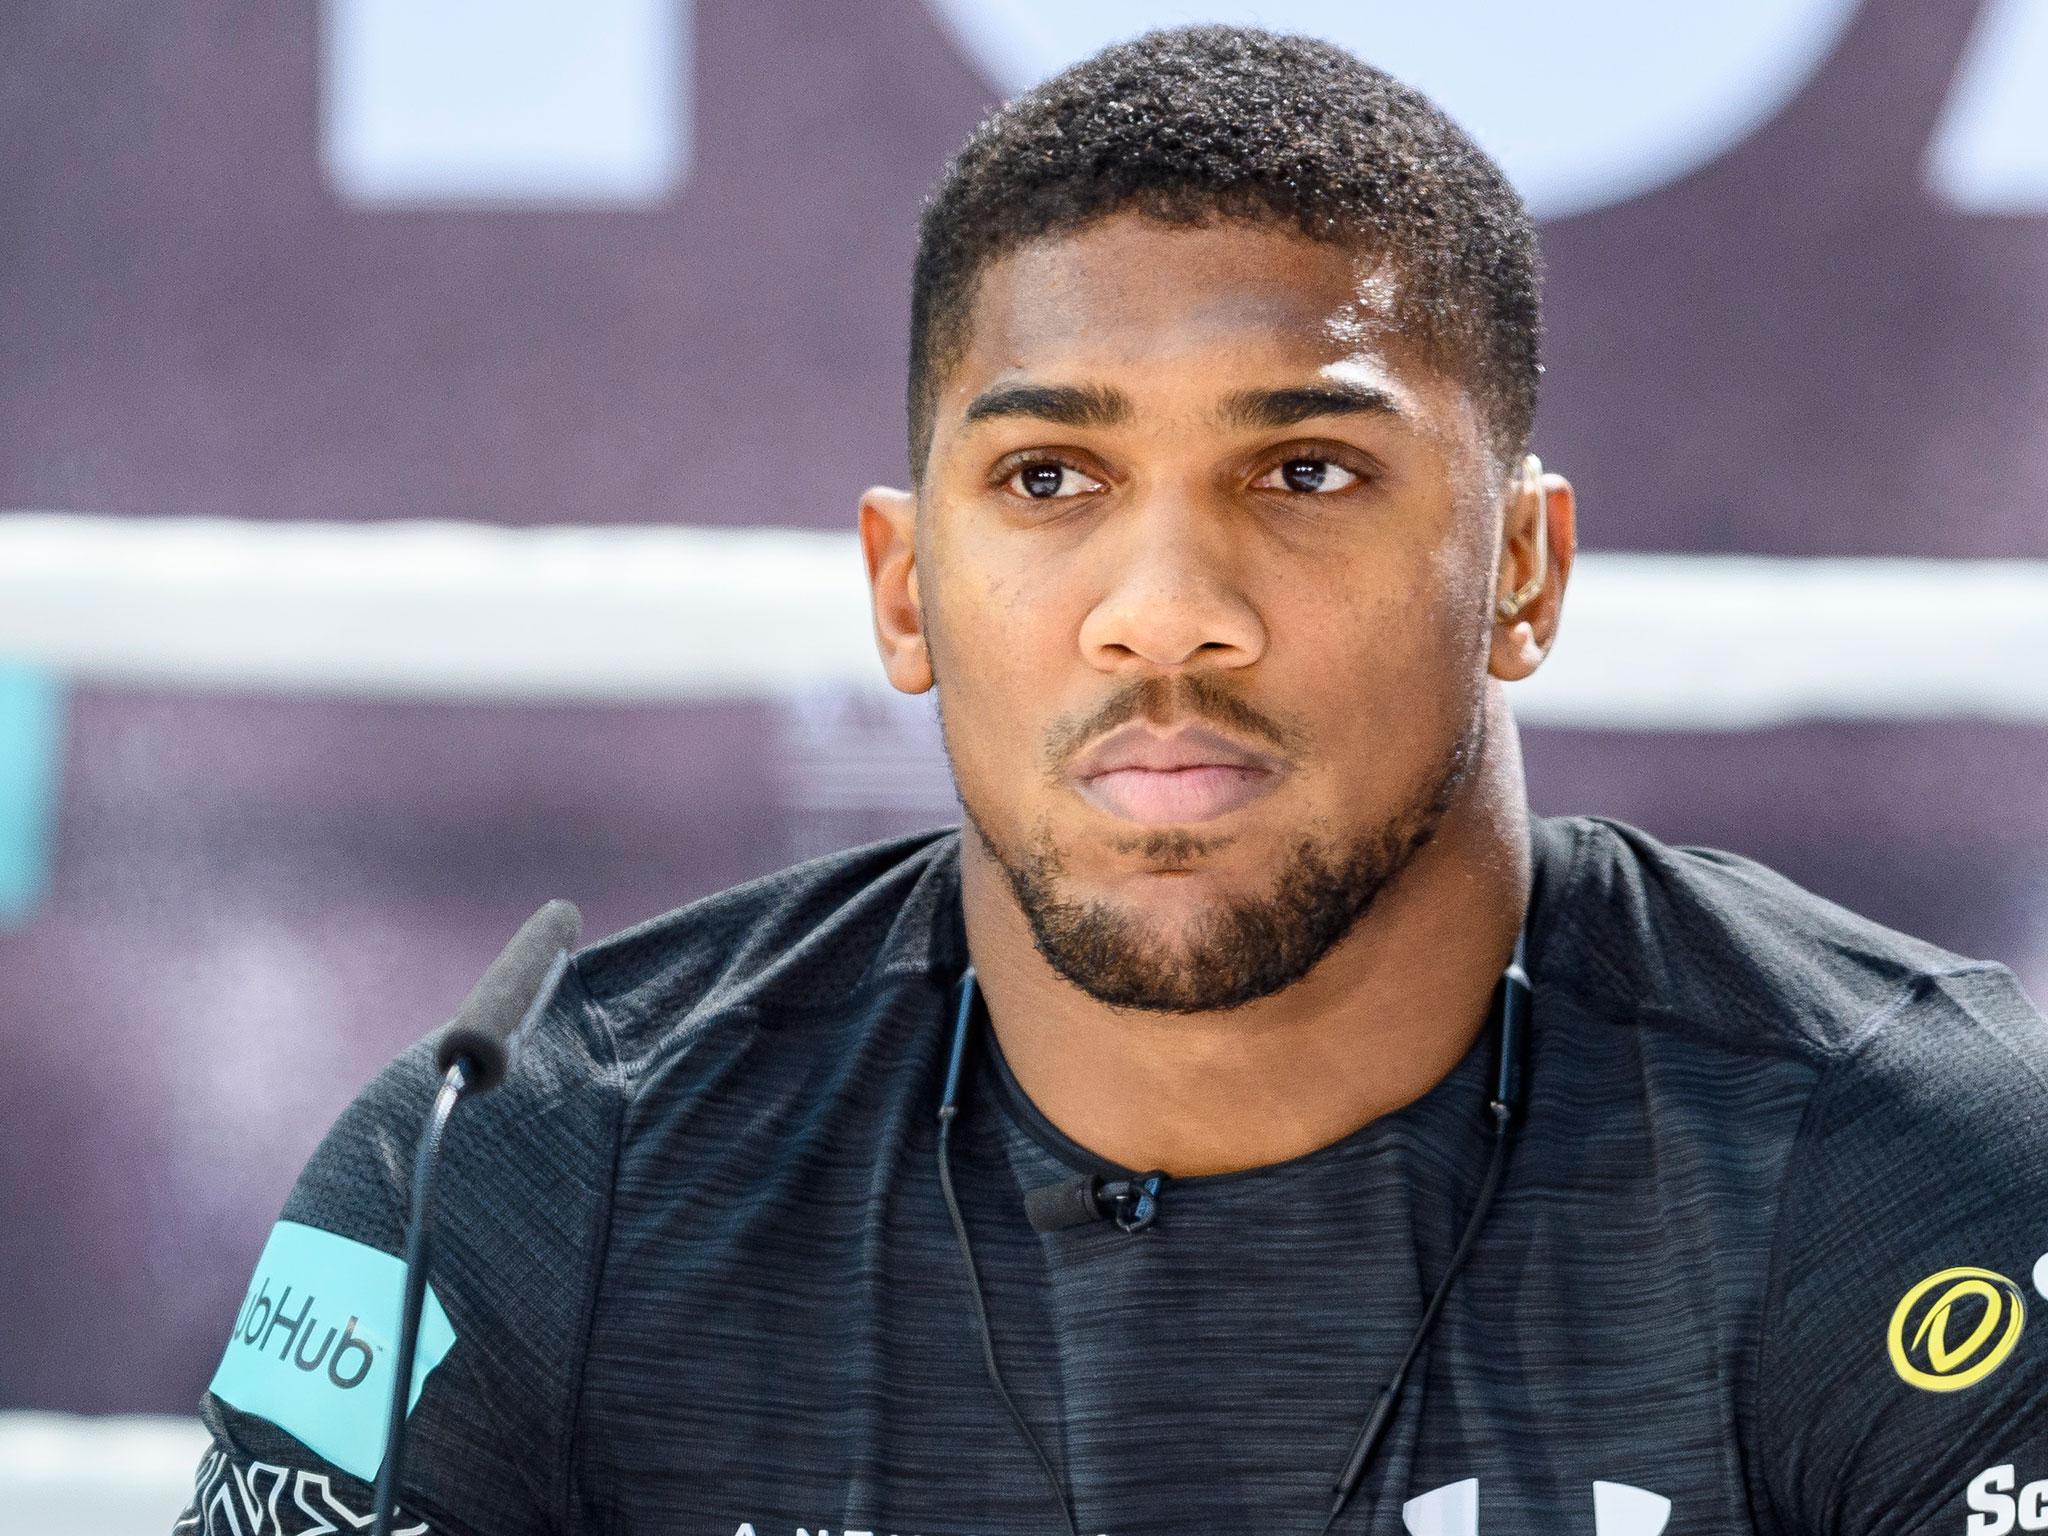 Anthony Joshua believes his entire career has been building to this fight against Wladimir Klitschko